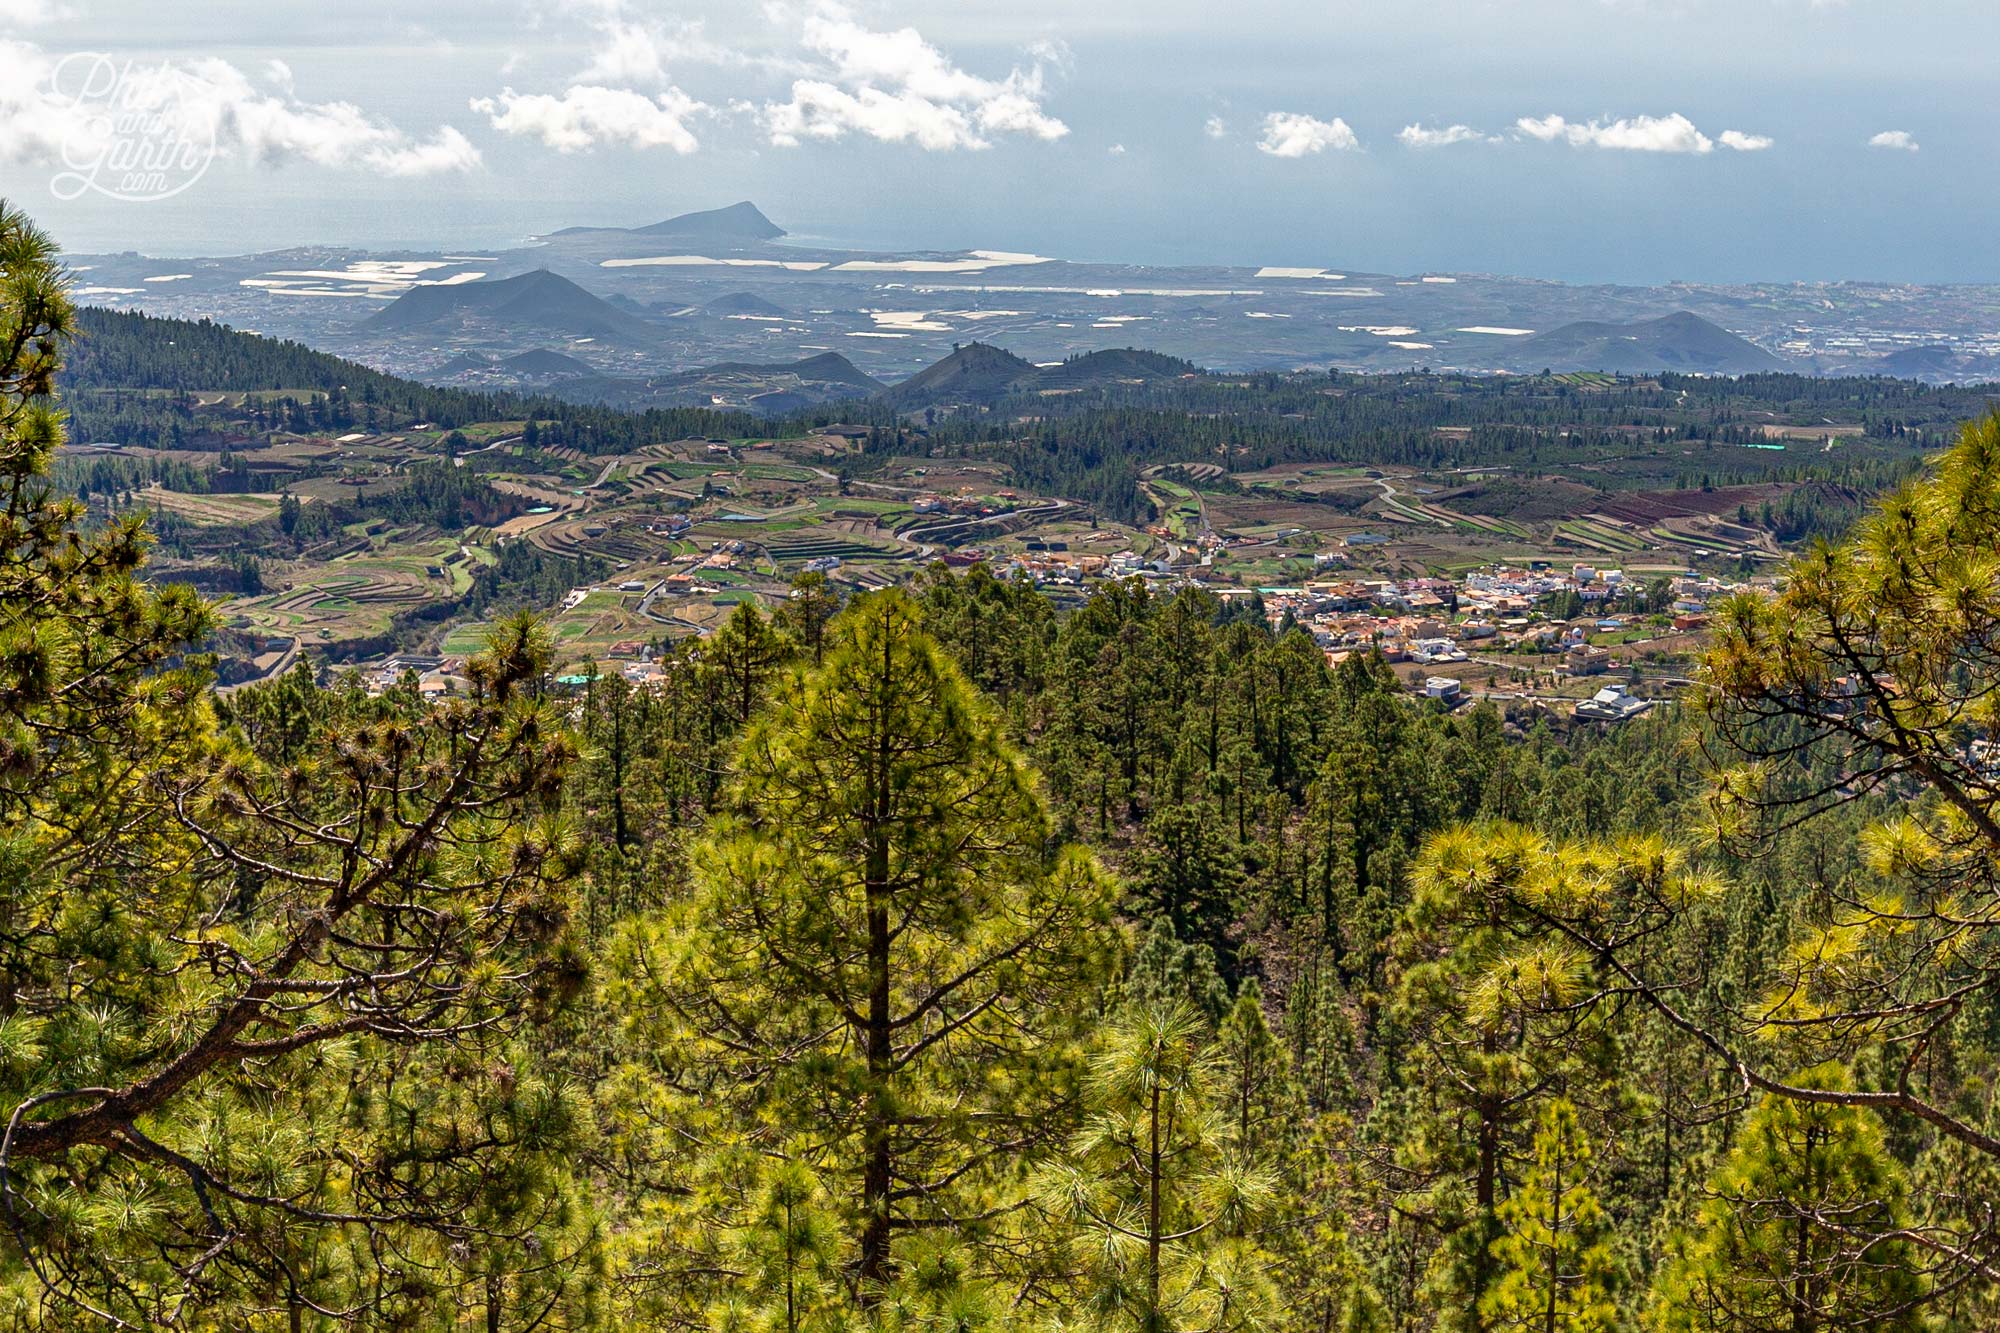 Tenerife's diverse landscape include lush green pine forests and banana plantations